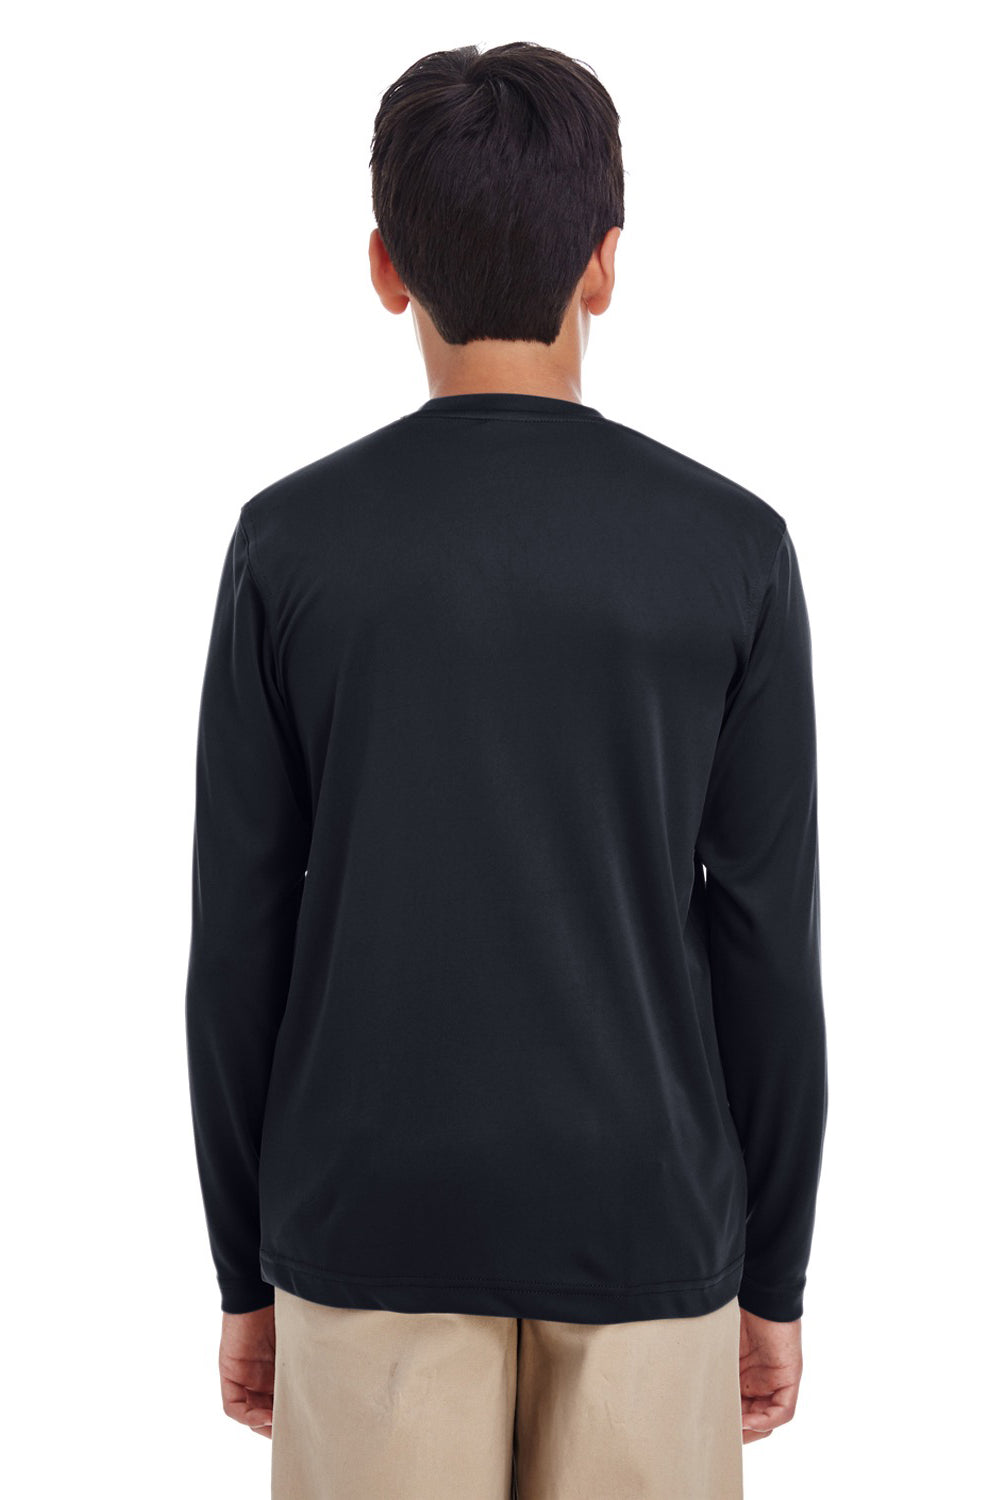 UltraClub 8622Y Youth Cool & Dry Performance Moisture Wicking Long Sleeve Crewneck T-Shirt Black Back